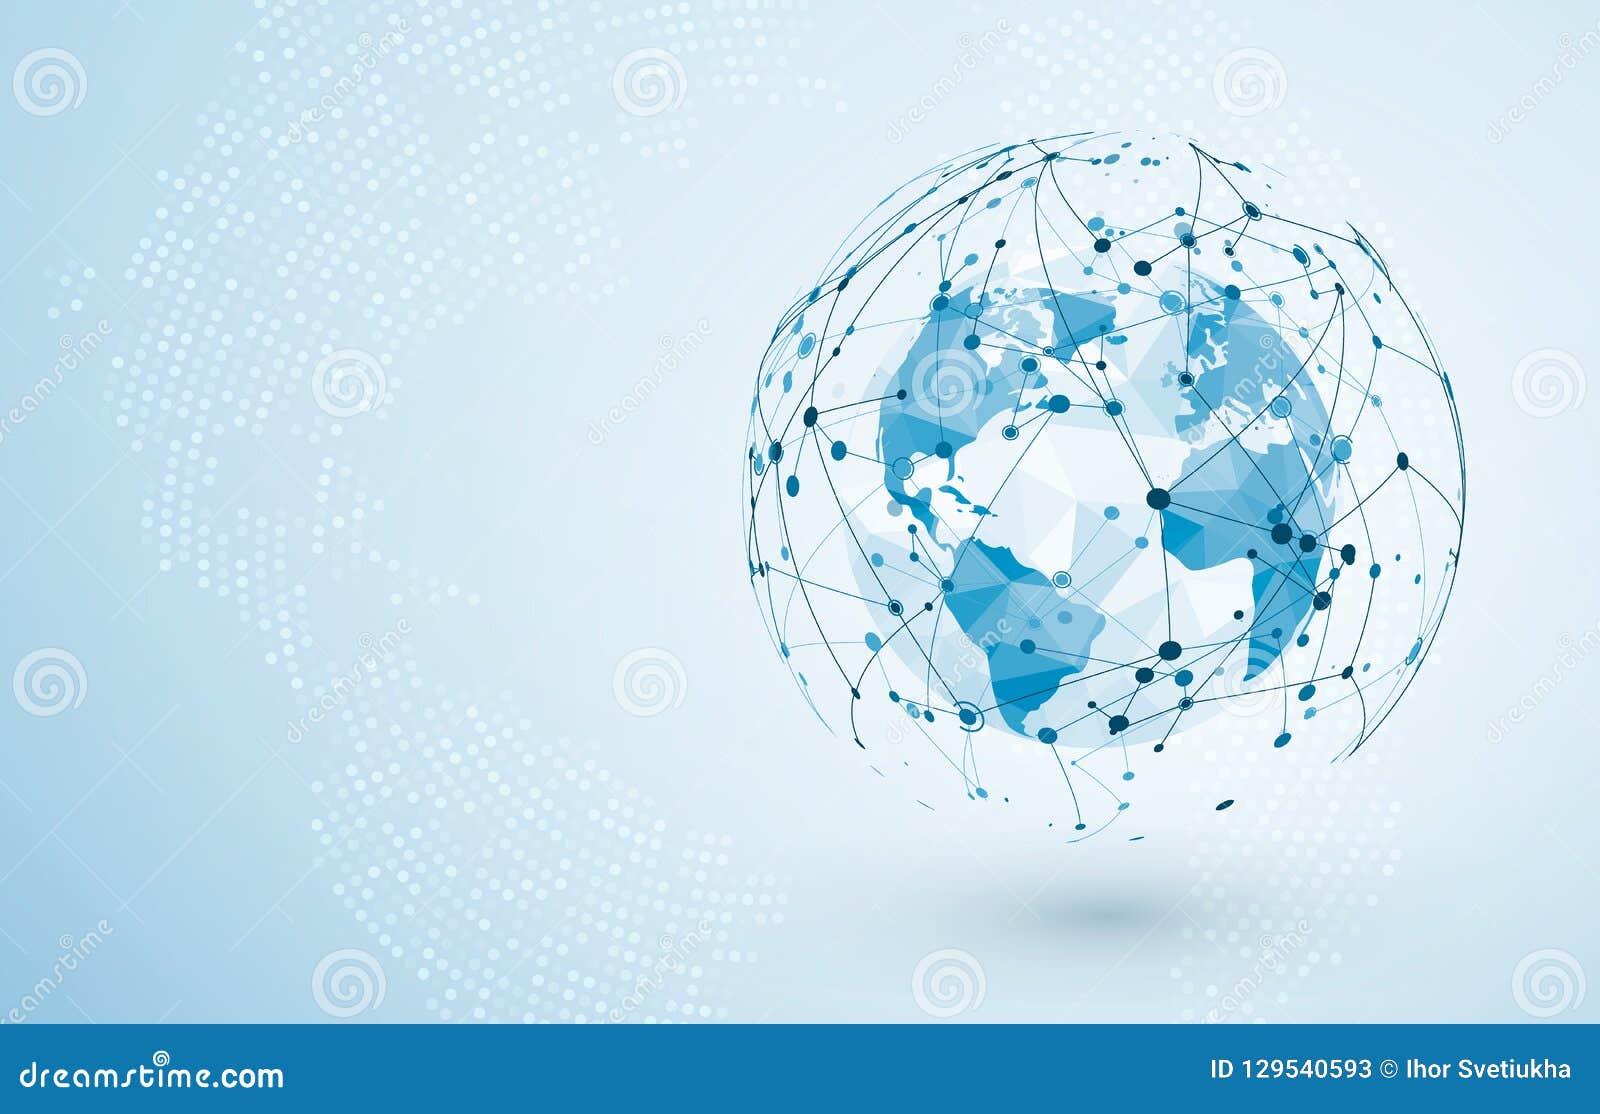 global network connection. big data or global social network connection. low polygonal world map concept of global business